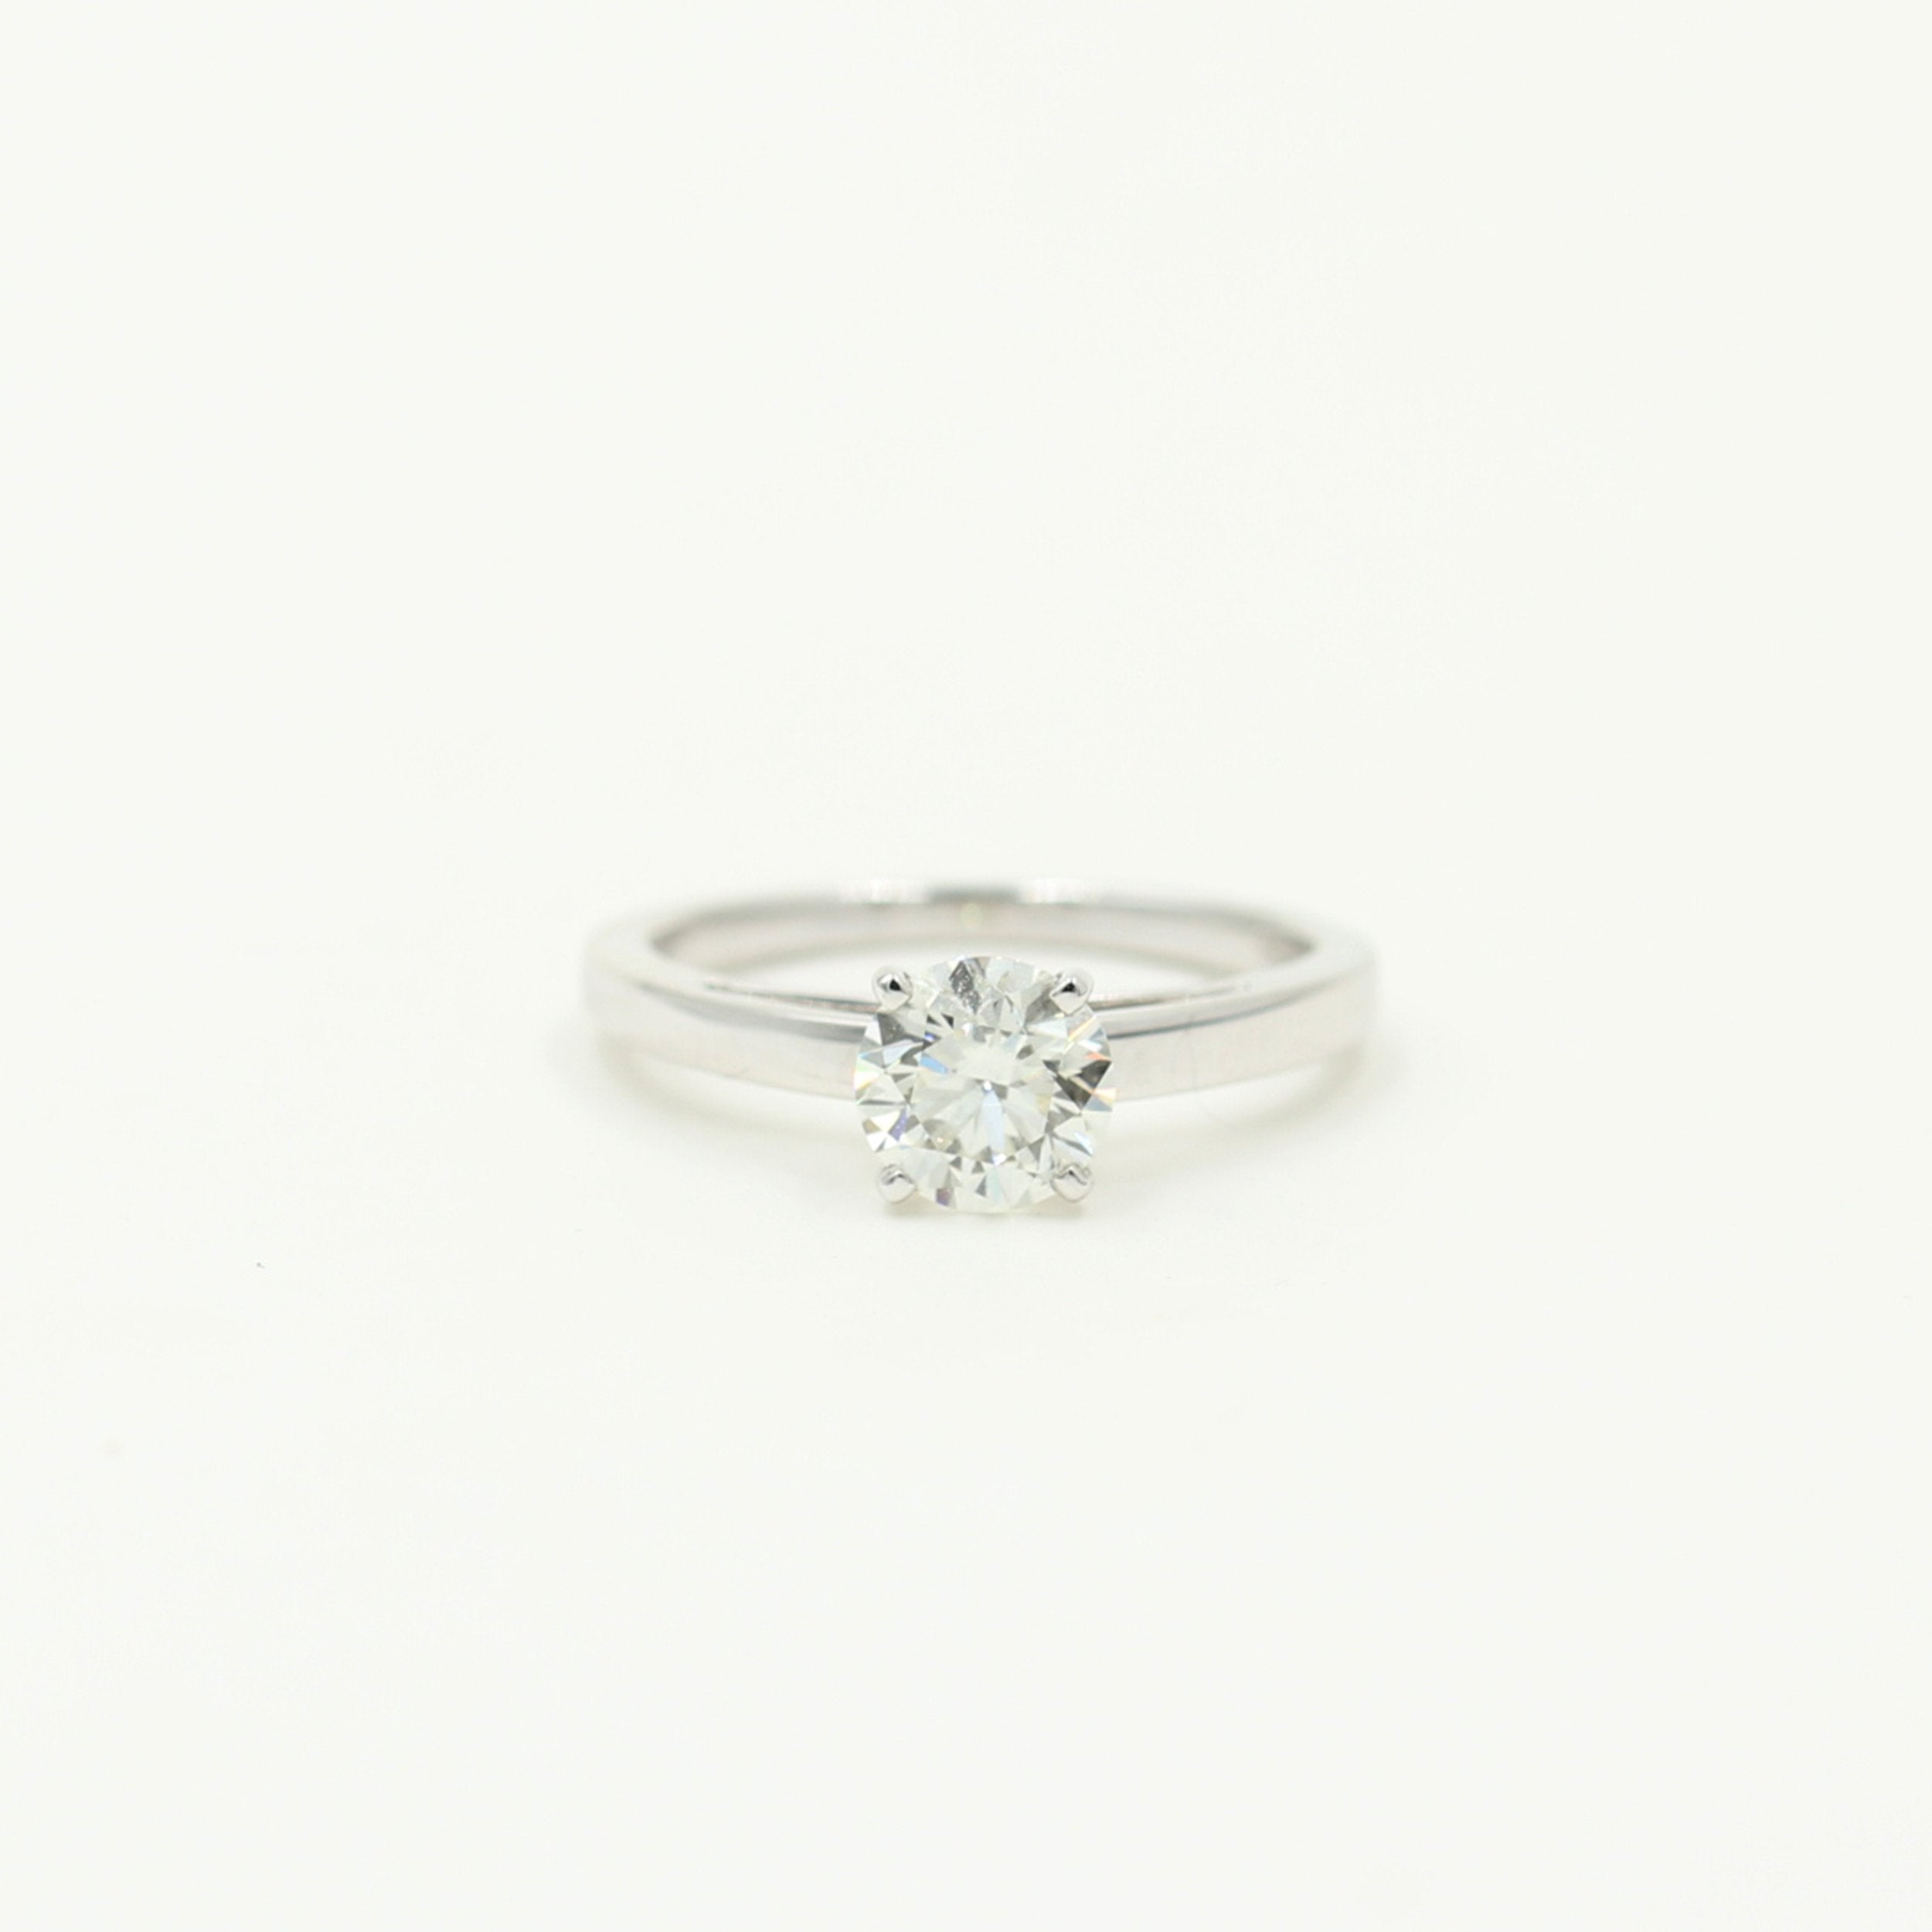 Solitairering med 0,71 ct. K.SI1 brillant